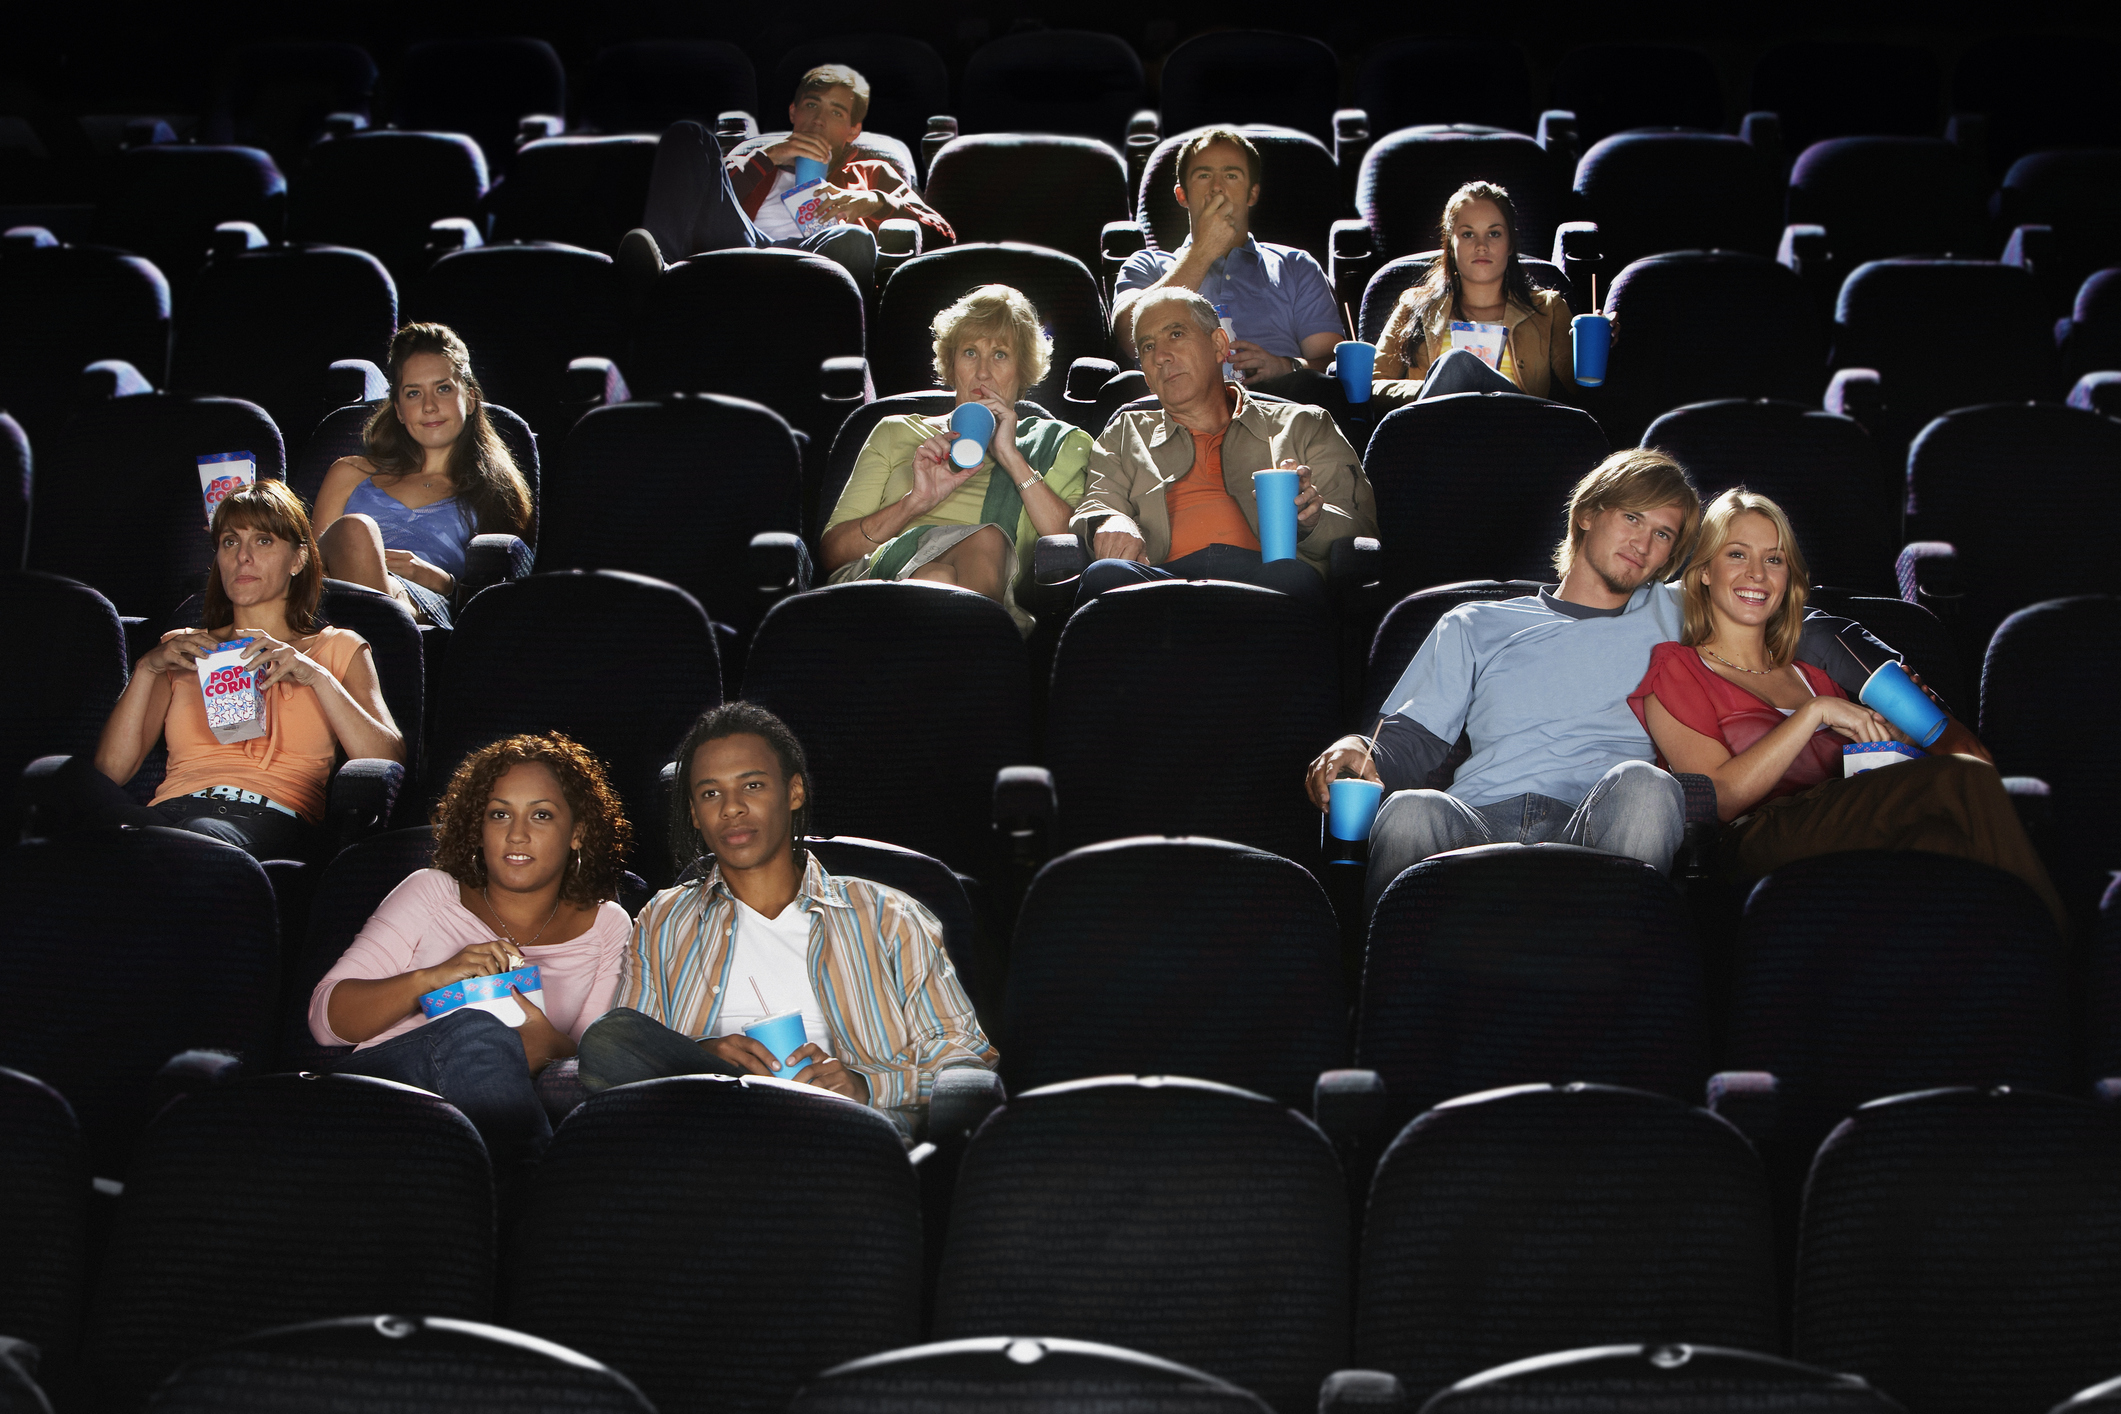 People Watching Movie in Movie Theater